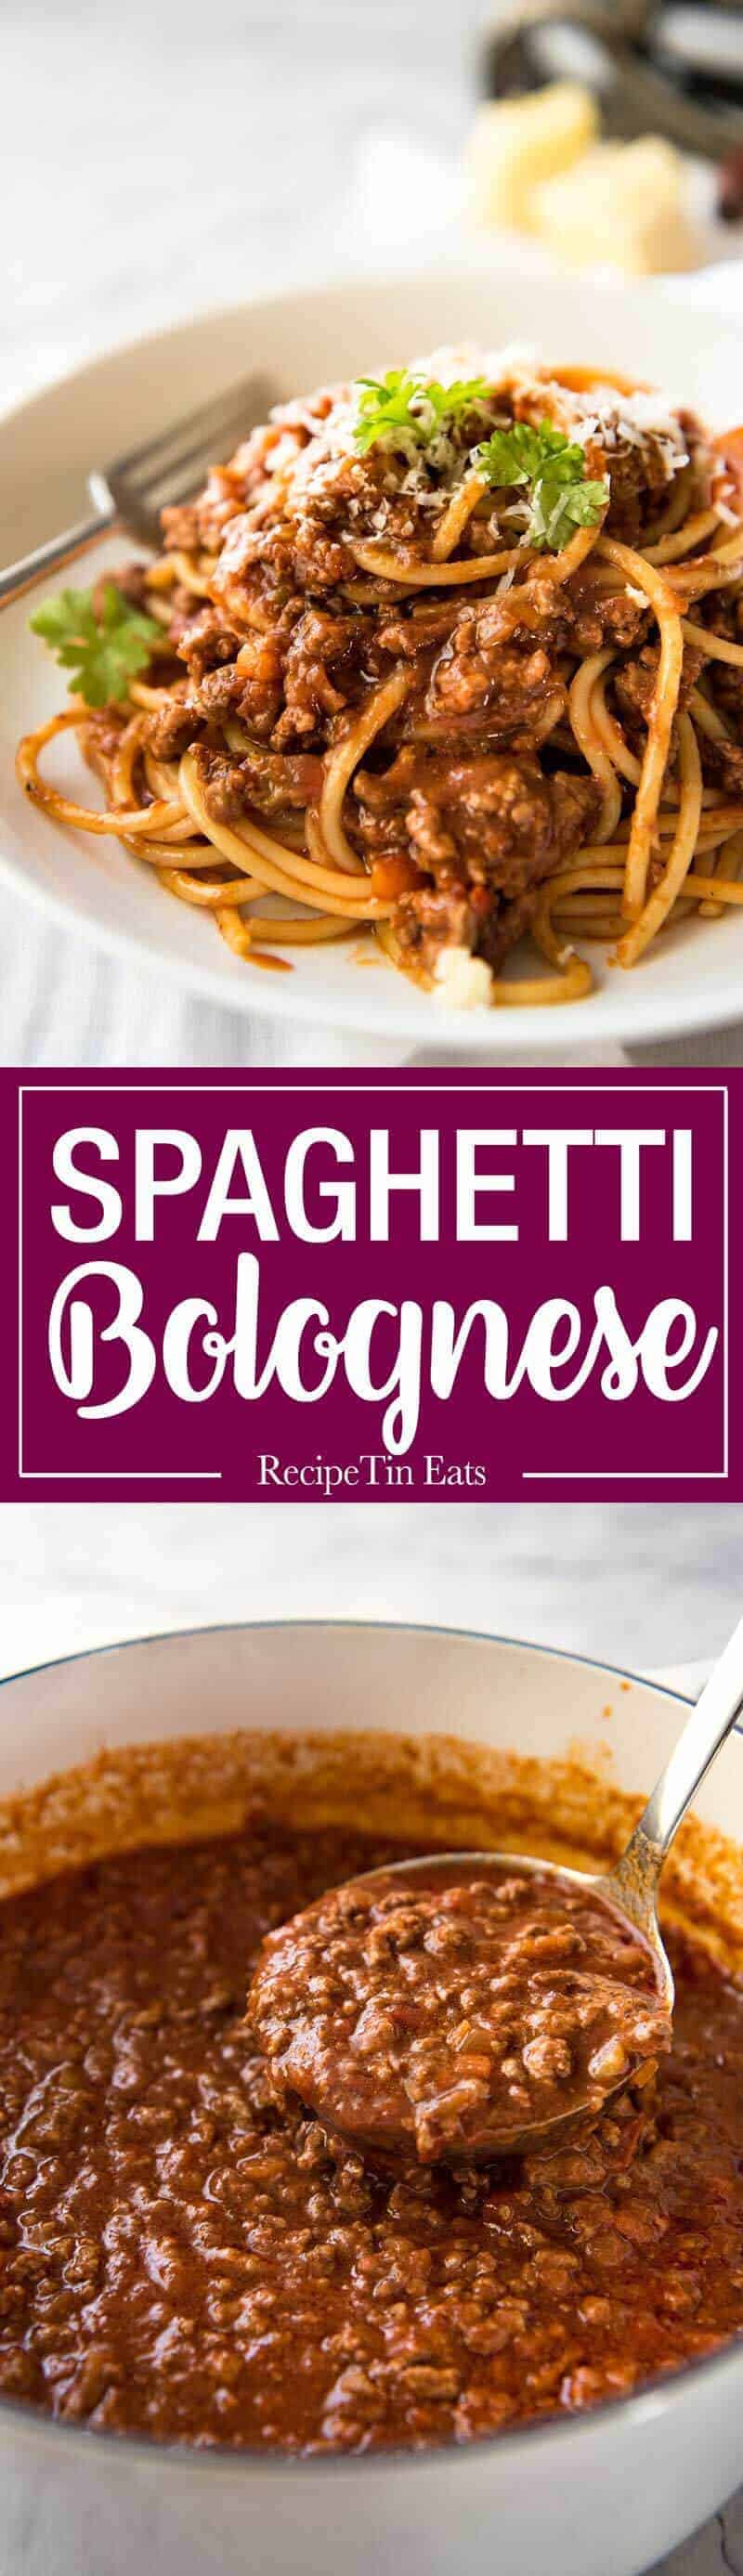 Spaghetti Bolognese - Thick, rich tomato sauce with gorgeous depth of flavour, on the table in 30 minutes! www.recipetineats.com